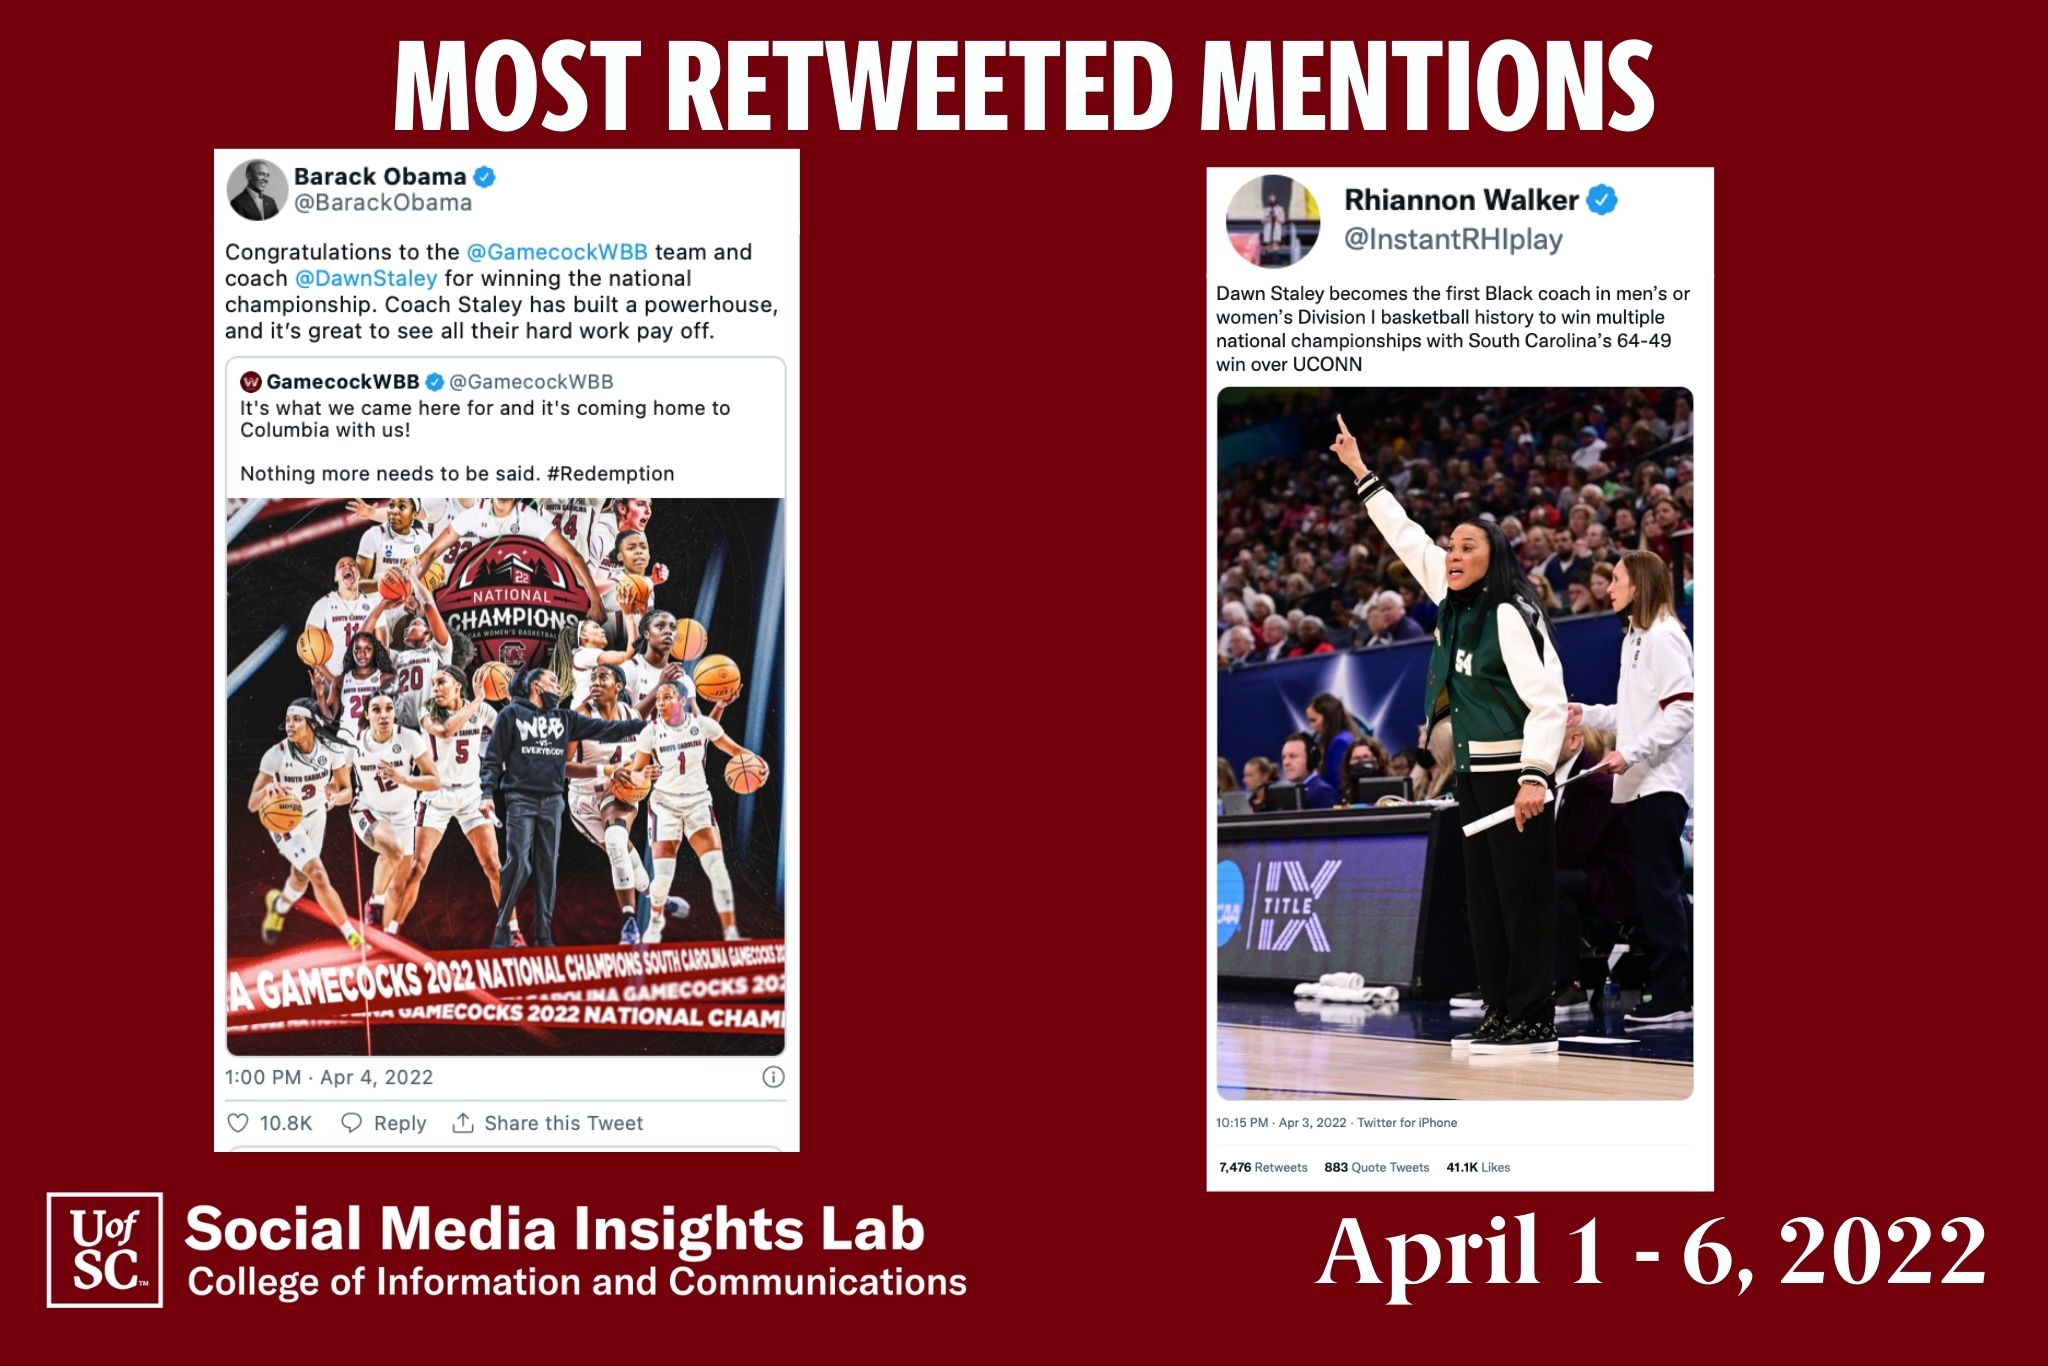 The most influential Tweet came from former President Barack Obama.  His post was seen more than 135 million times. Another influential post recognized Dawn Staley as the first Black coach to win a national championship in either men’s or women’s basketball. 